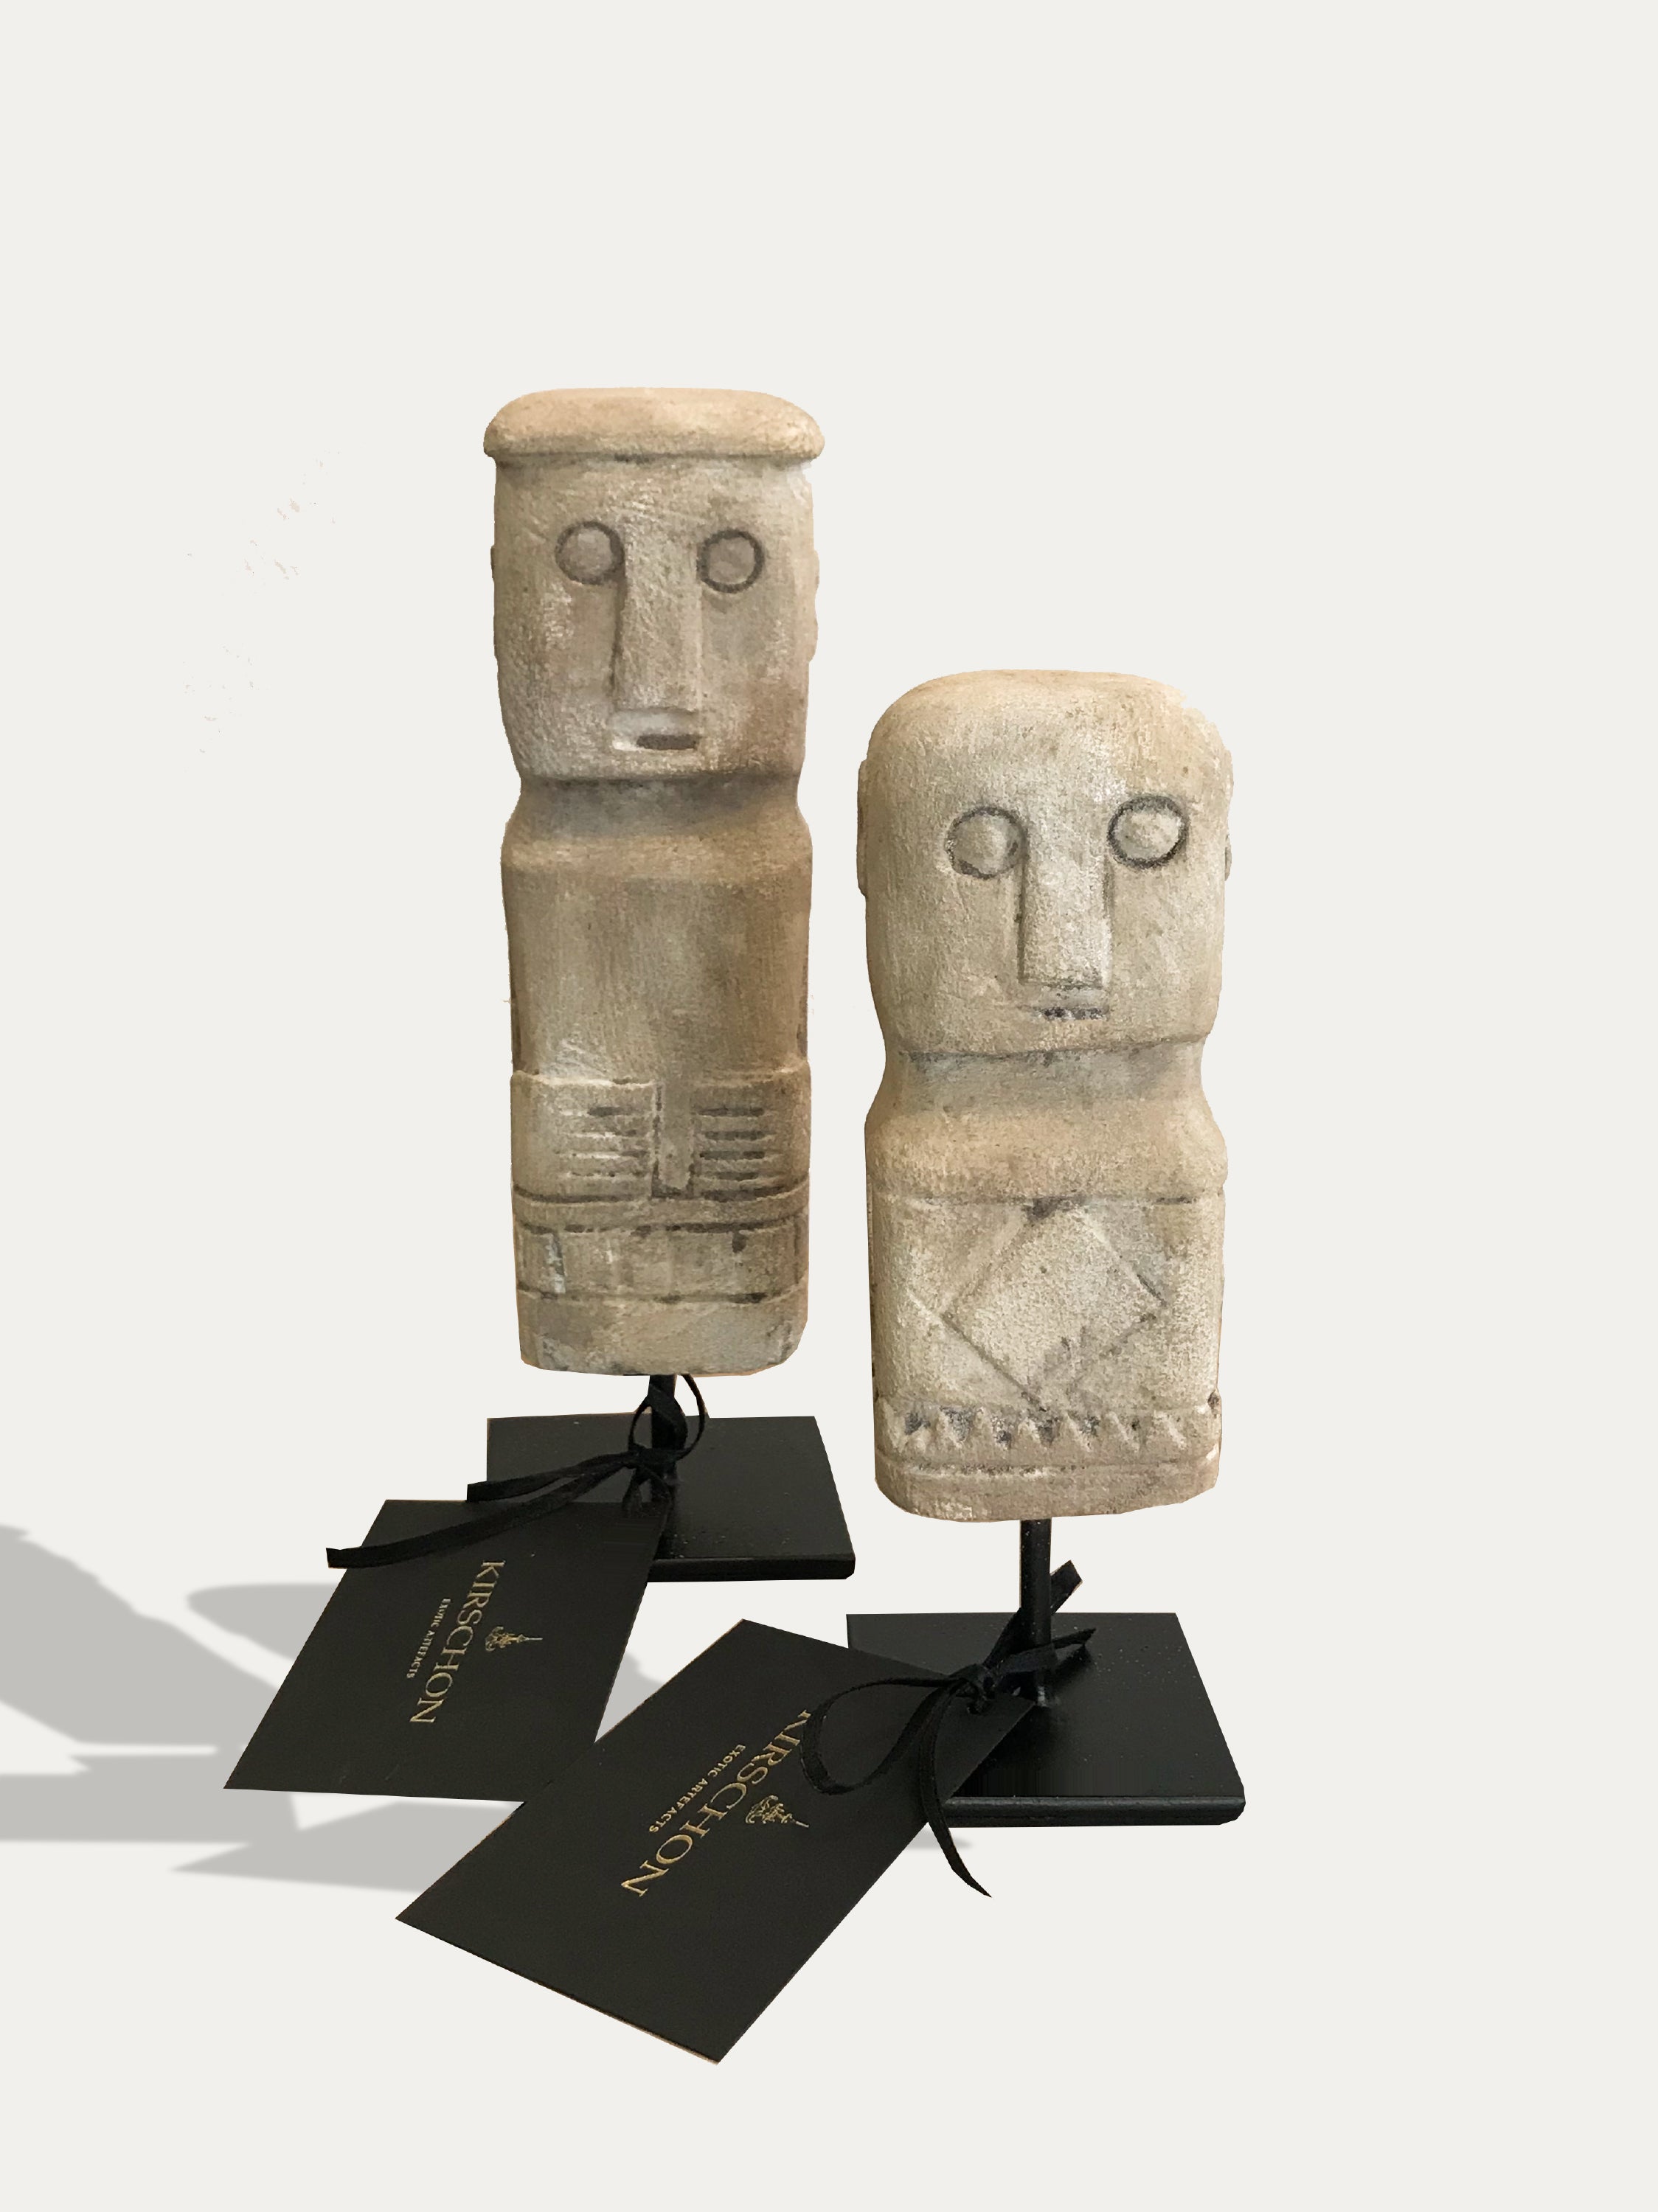 Set of 2 Tribal Limestone Statues from Timor - Asian Art from Kirschon